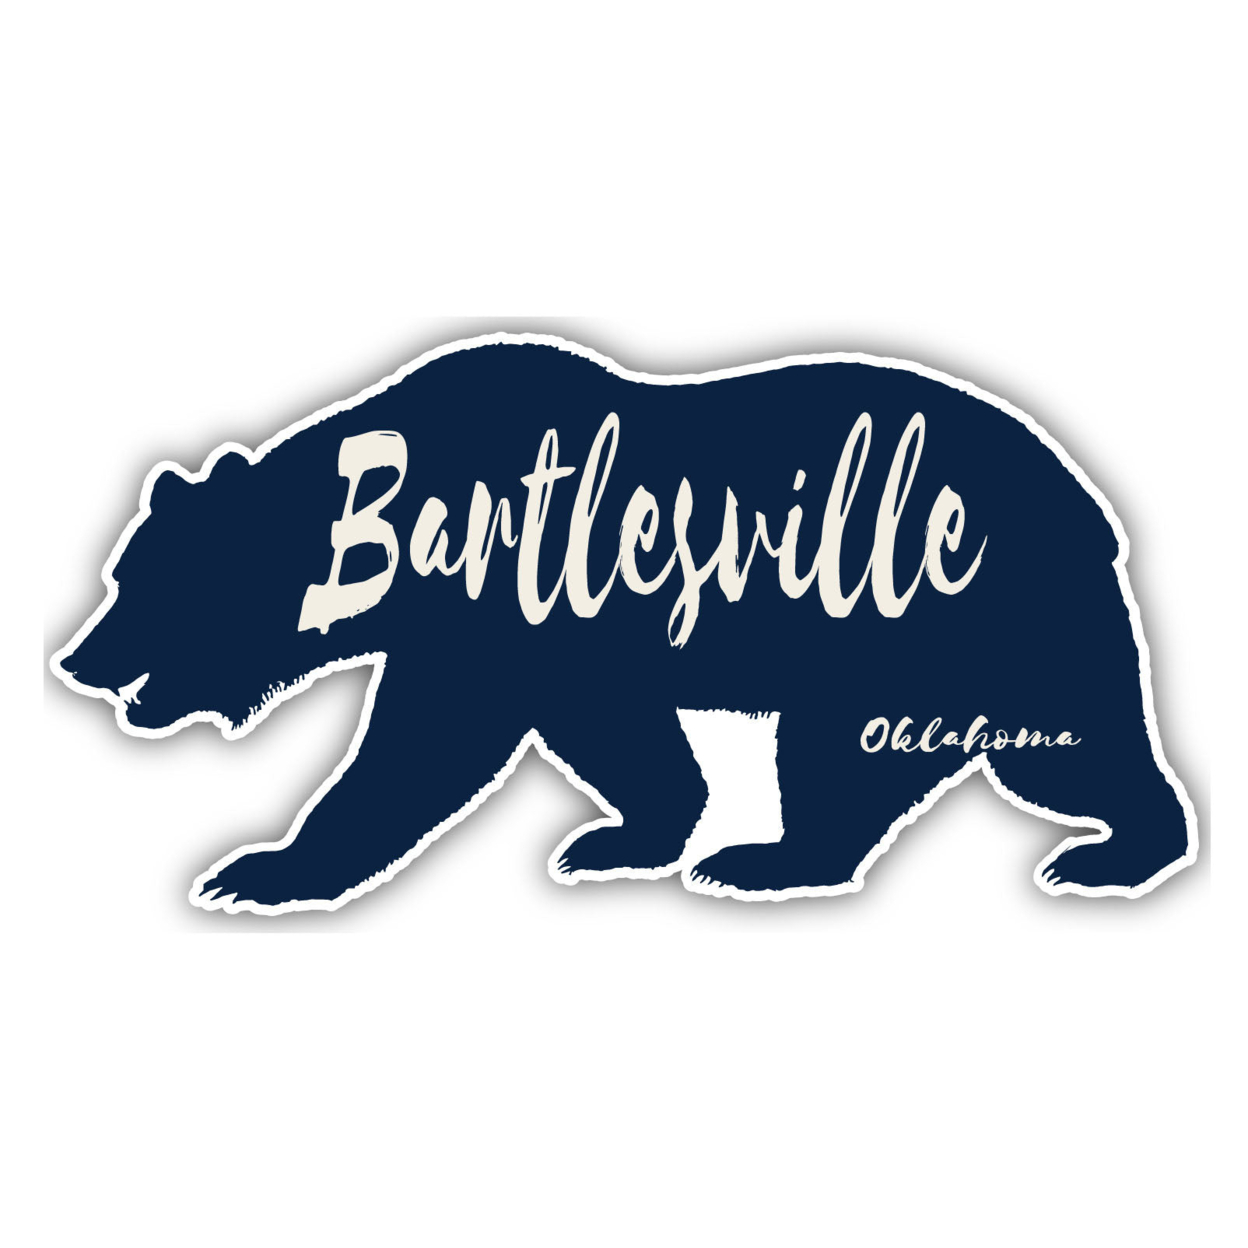 Bartlesville Oklahoma Souvenir Decorative Stickers (Choose Theme And Size) - 4-Pack, 8-Inch, Bear